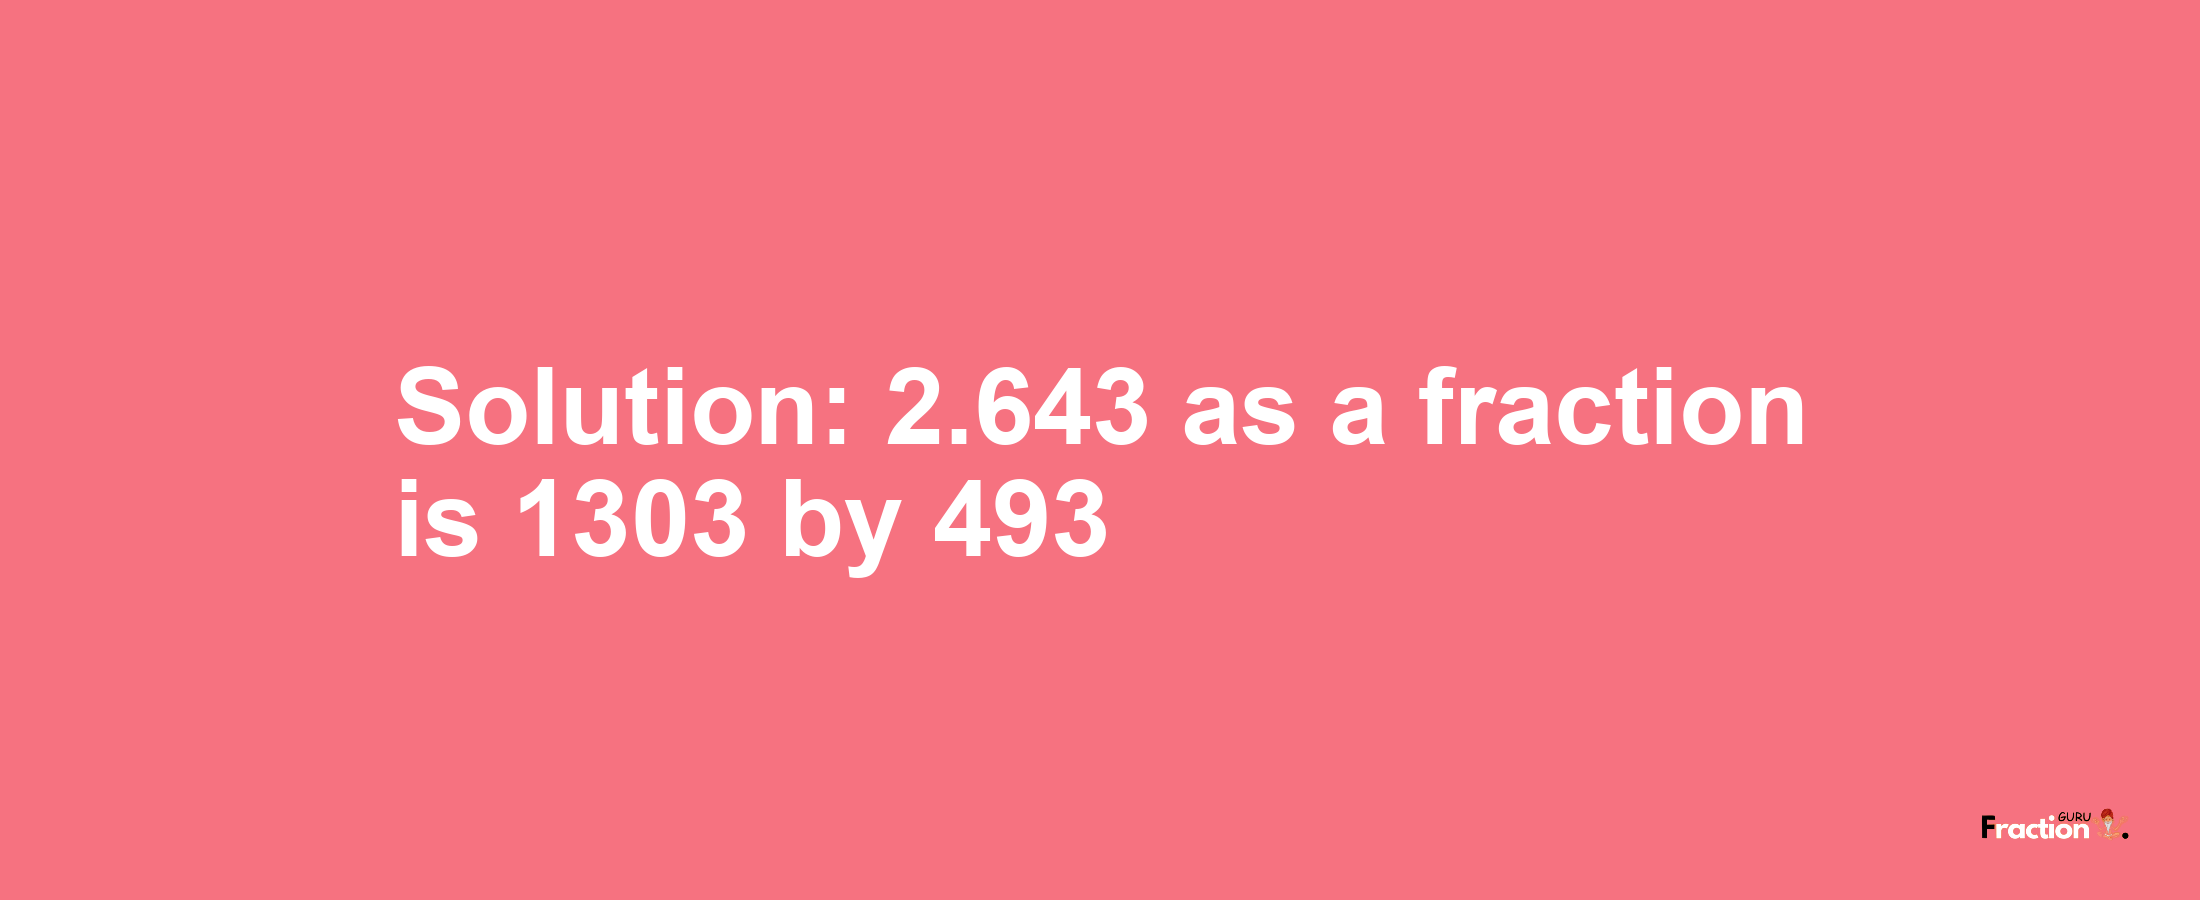 Solution:2.643 as a fraction is 1303/493